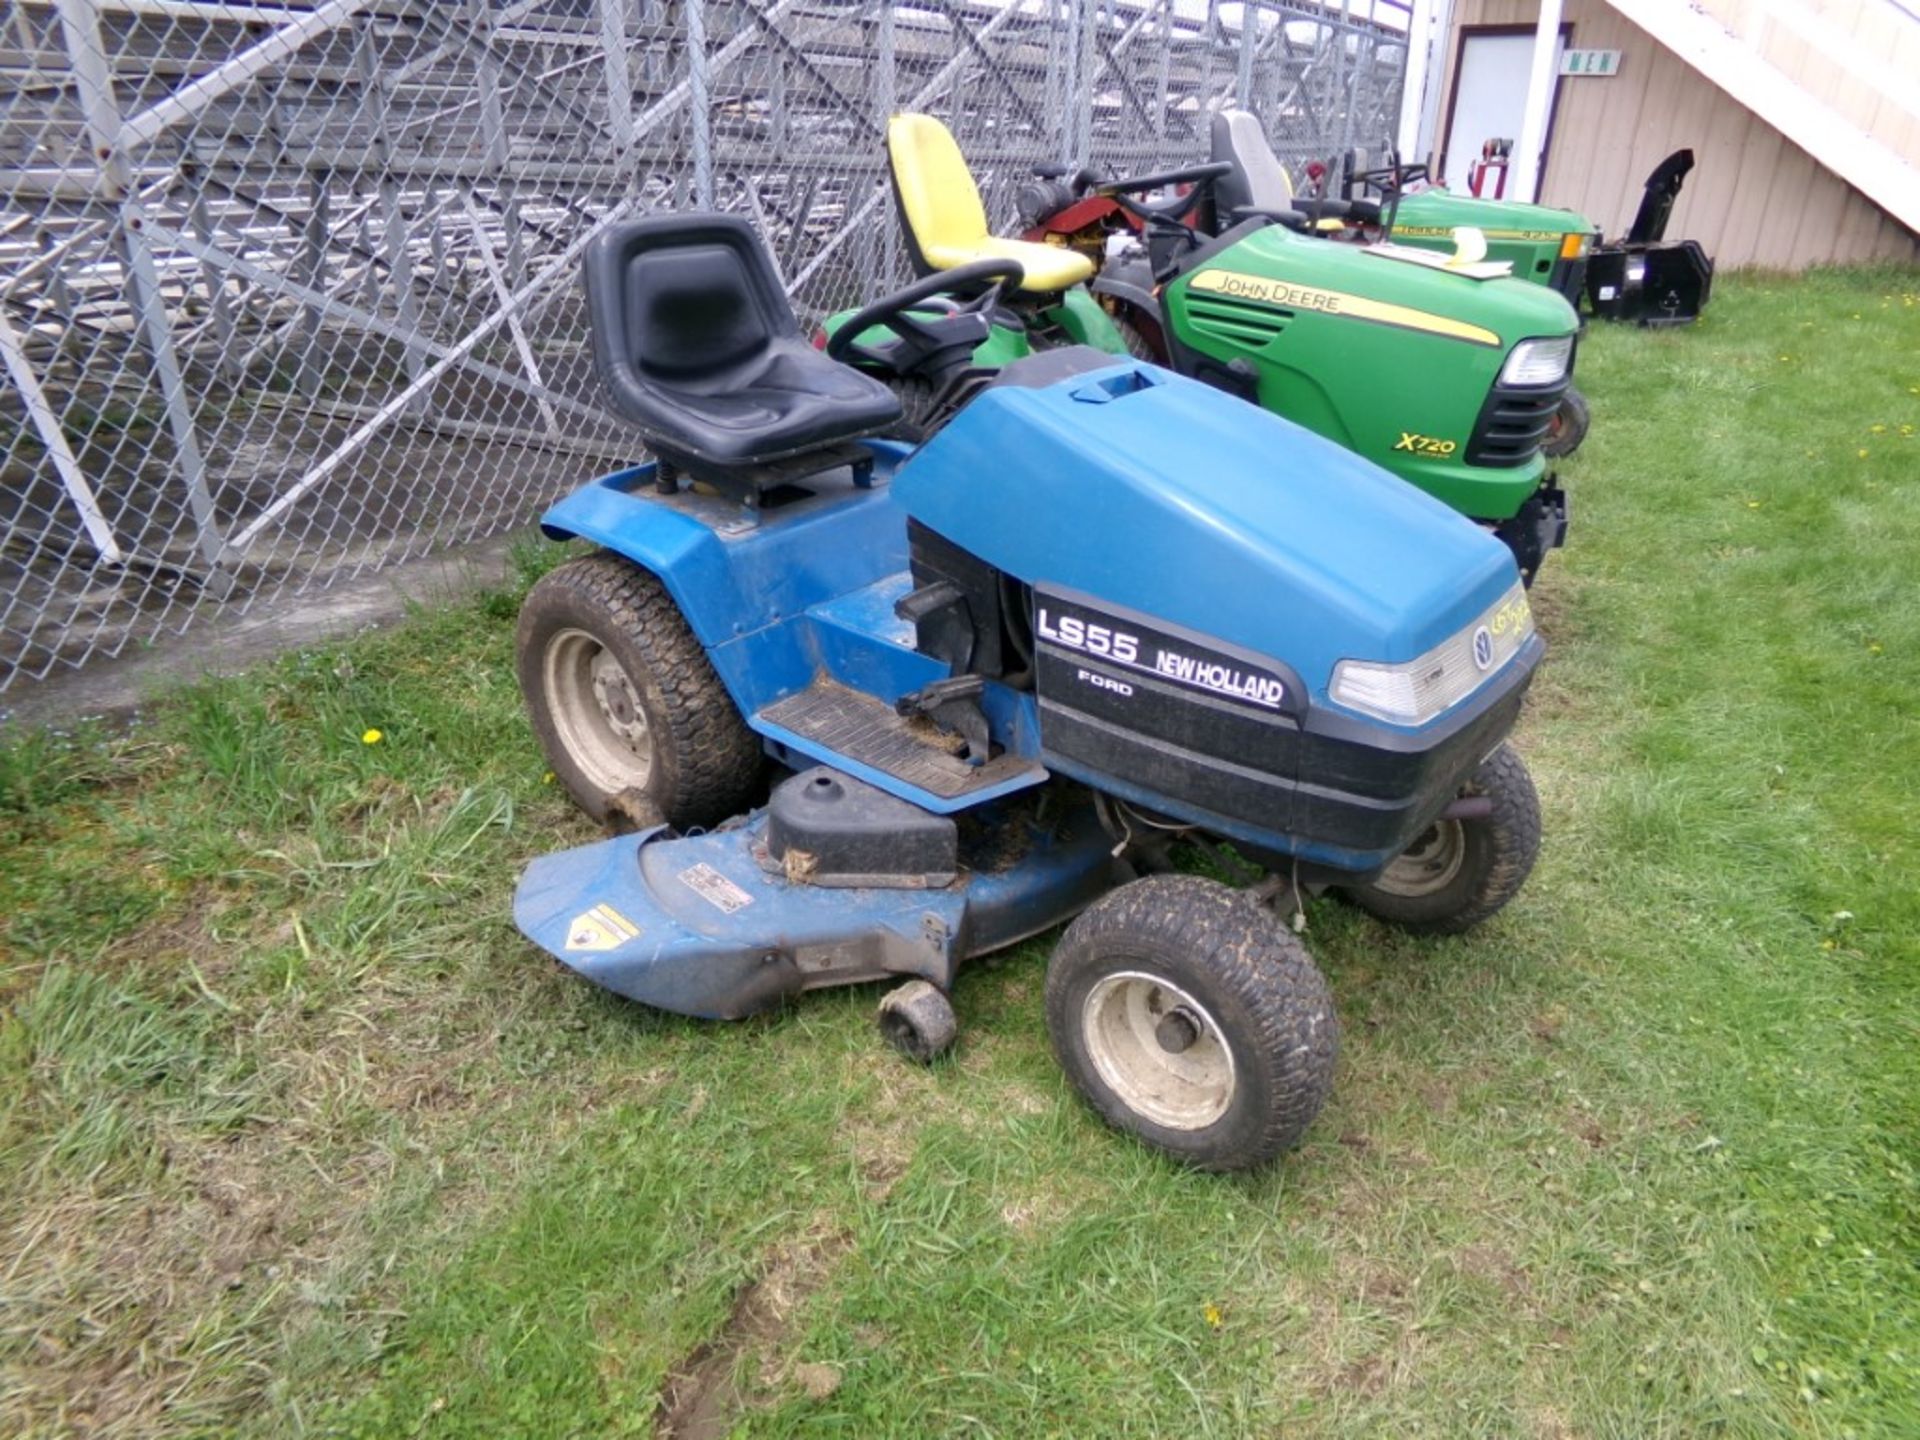 New Holland LS55 Riding Mower w/46'' Deck, 19 Hp., Kohler Engine, 361 Hours, (4705) - Image 2 of 2